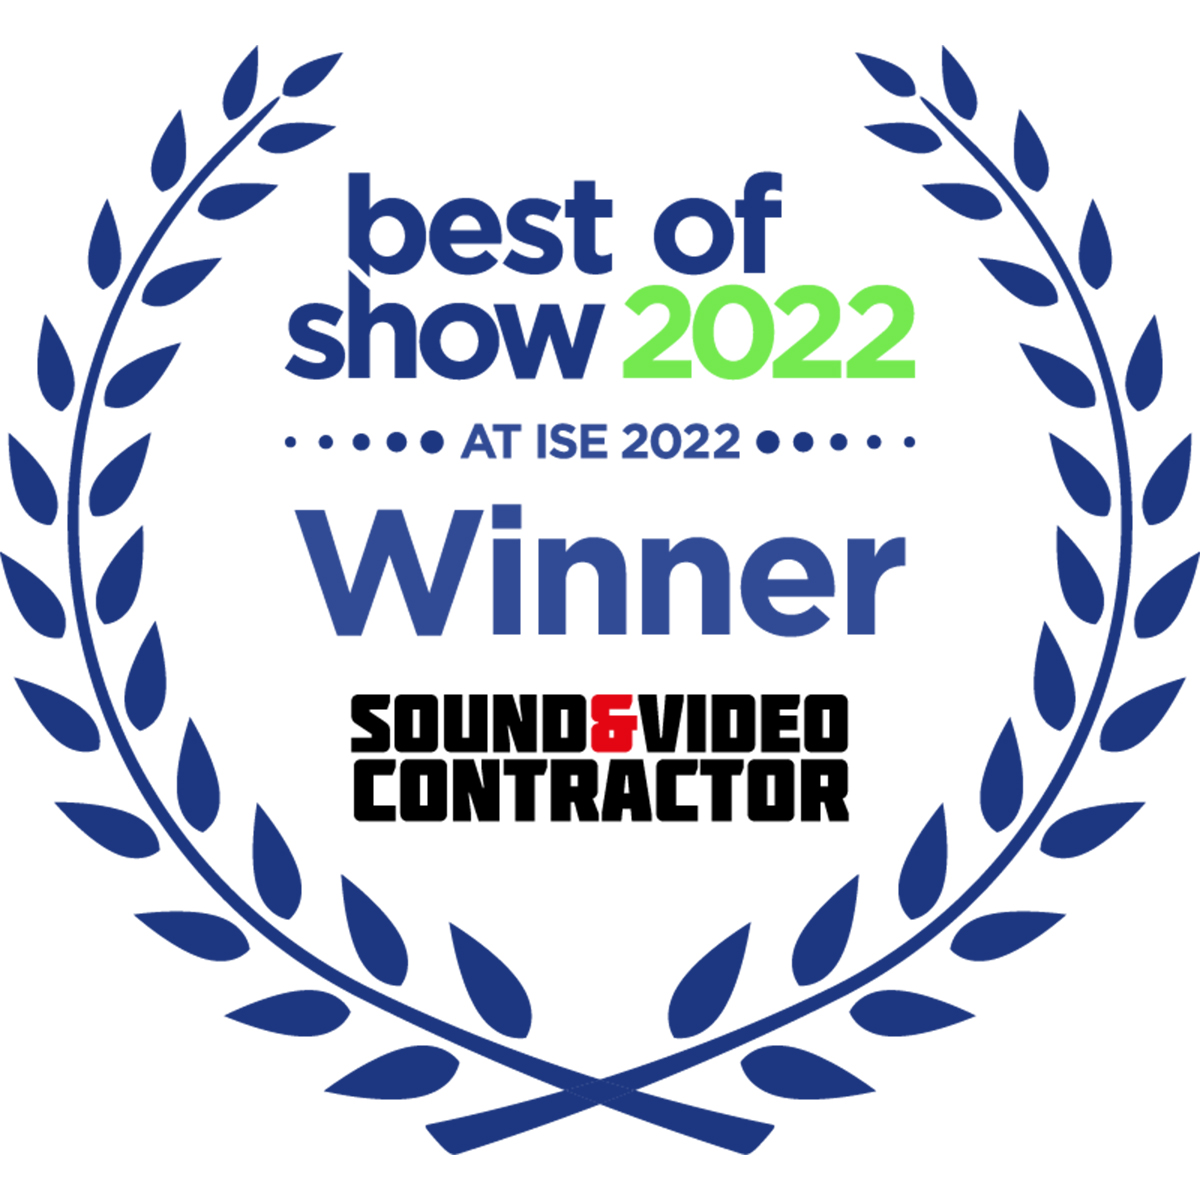 Sound & Video Contractor “Best of Show” at ISE